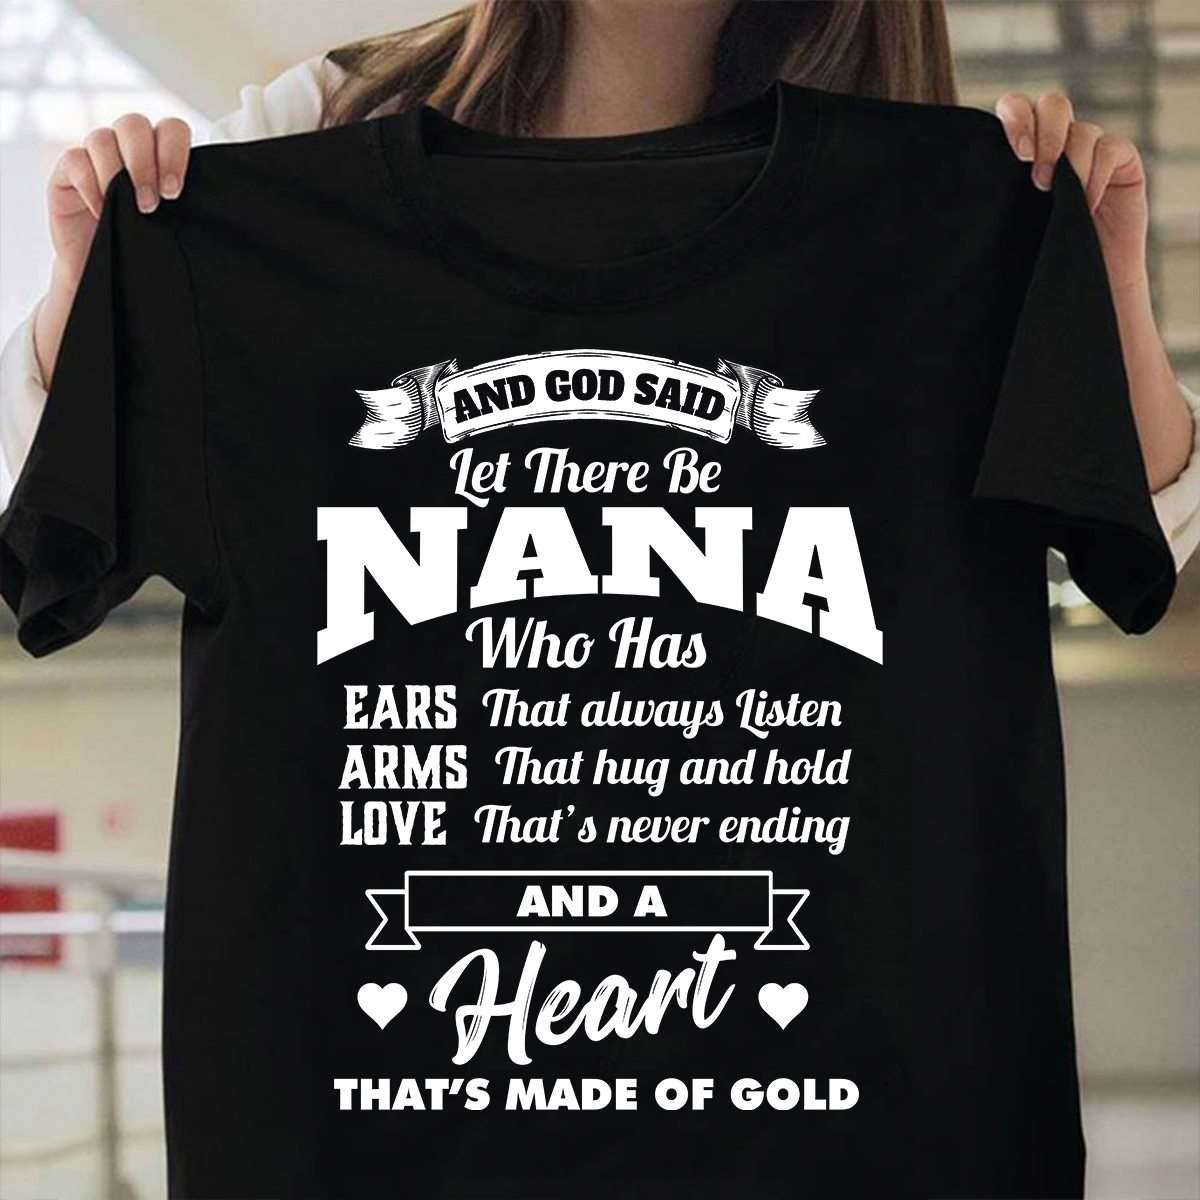 And god said let there be Nana who has ears, arms, love and a heart - That's made of god